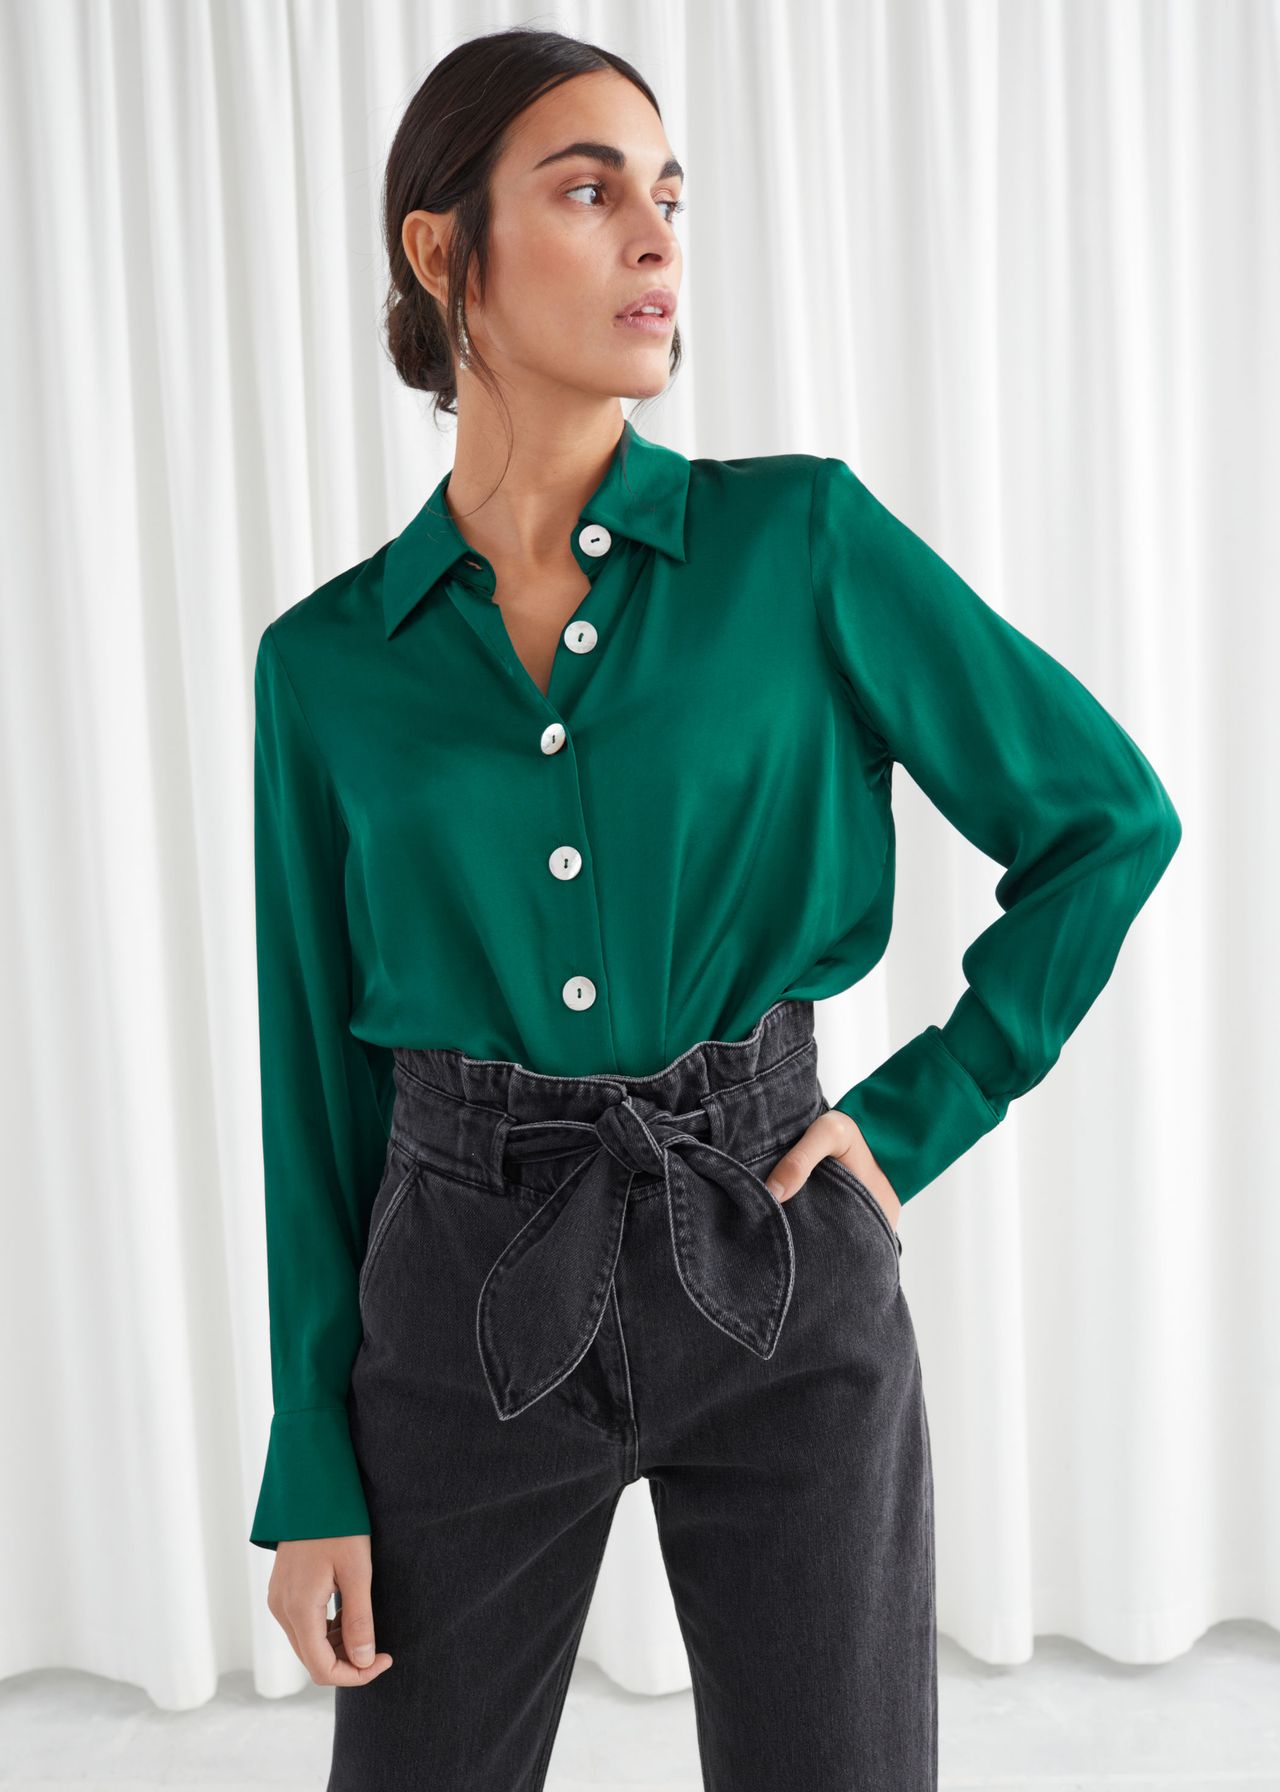 5 Waist-Up Trends People Are Shopping For | Who What Wear